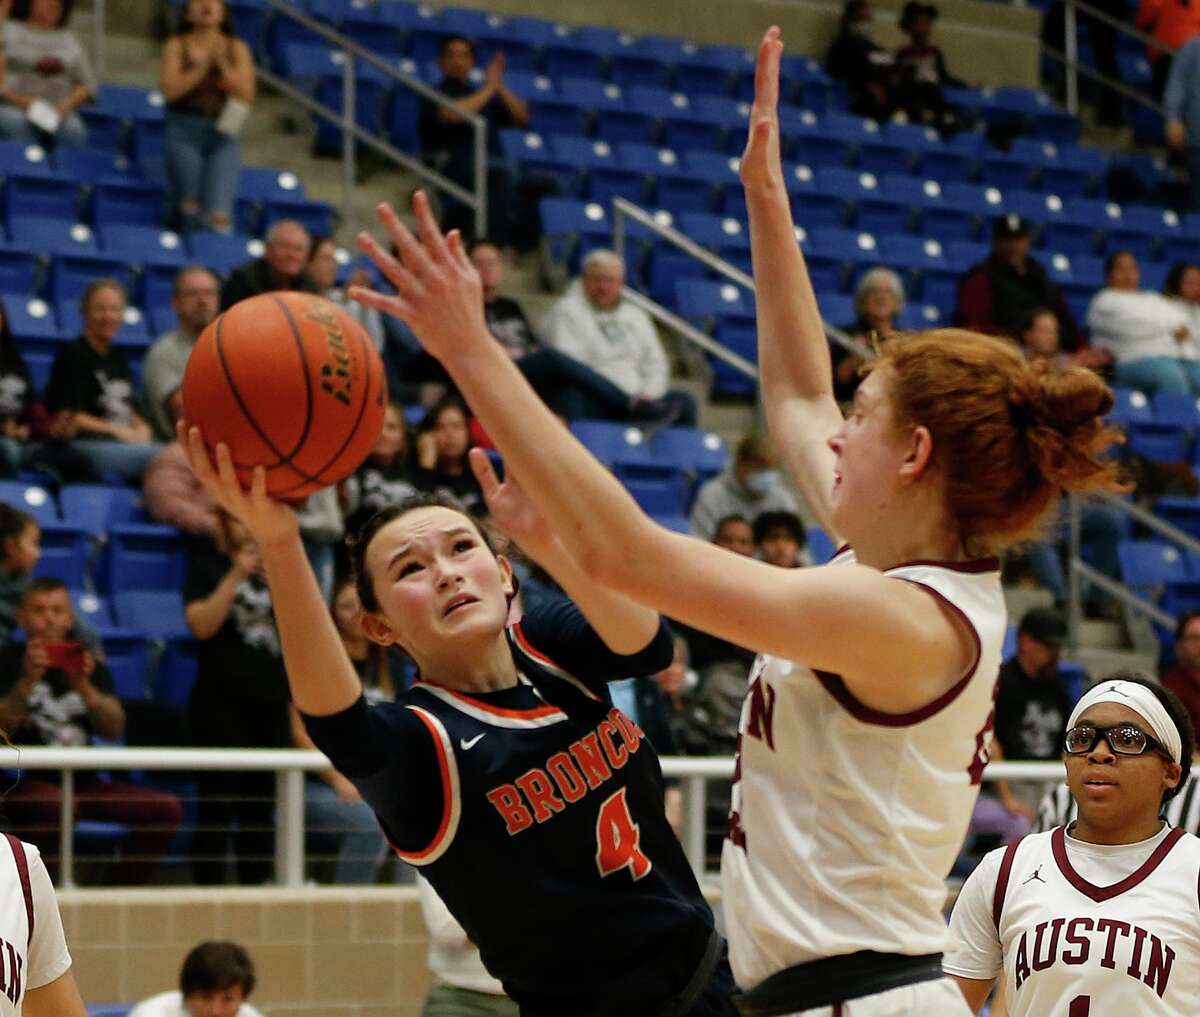 Brandeis guard Rian Forestier did a bit of everything in the Allen tournament, averaging 22 points, 12 rebounds, 7 steals and 5 assists.